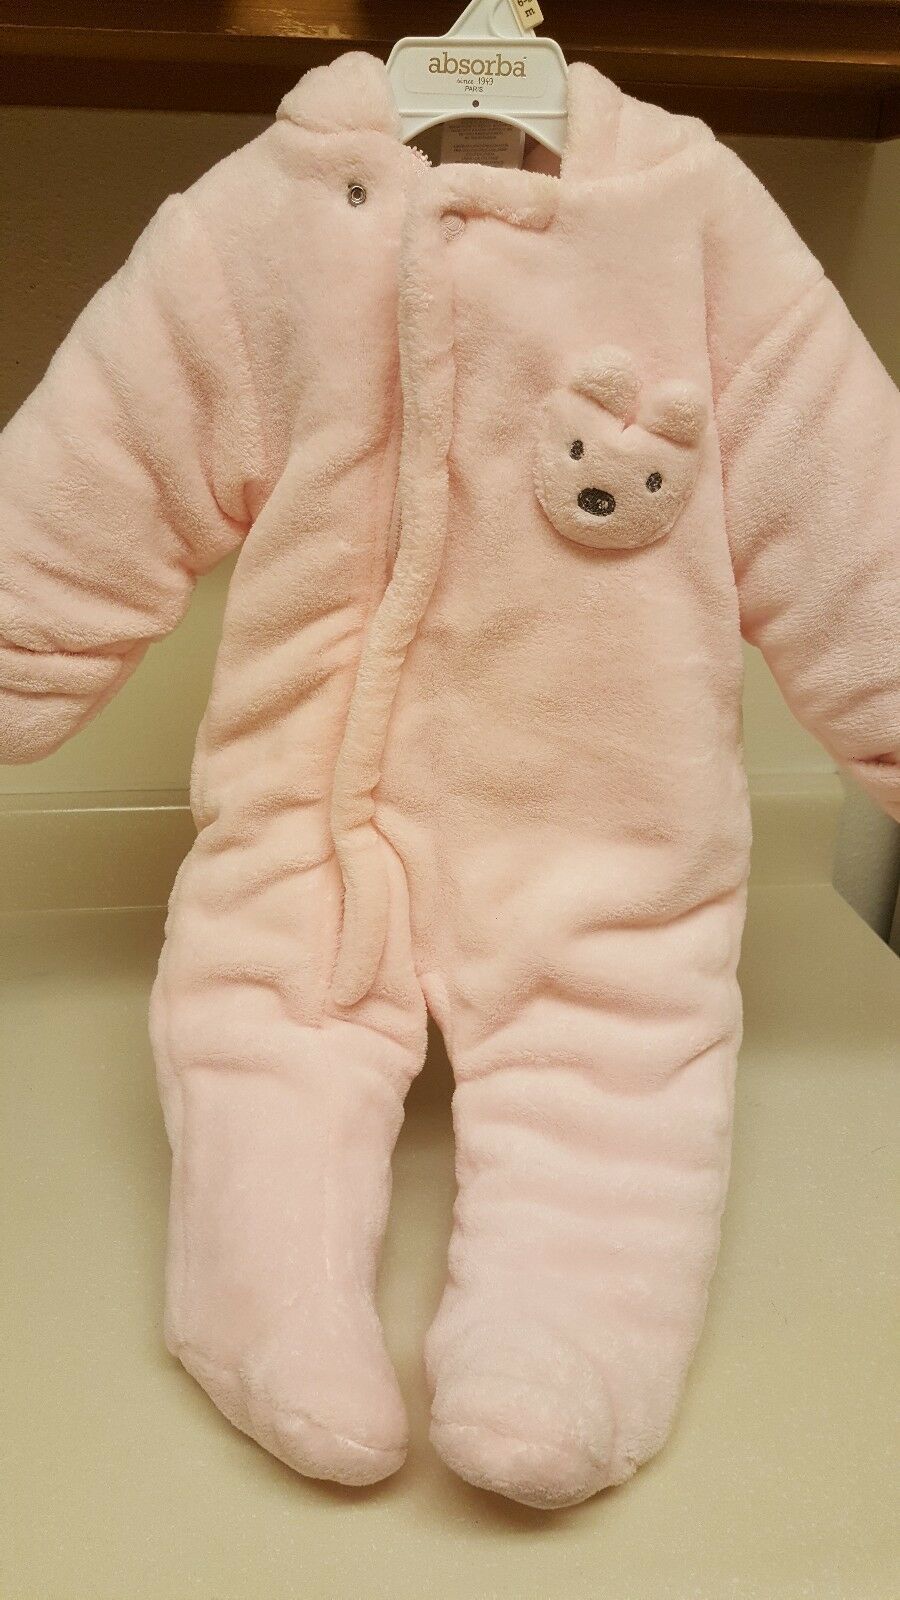 NWOT ABSORBA Baby Girls Pink Snowsuit Size 6-9 months - $18.80